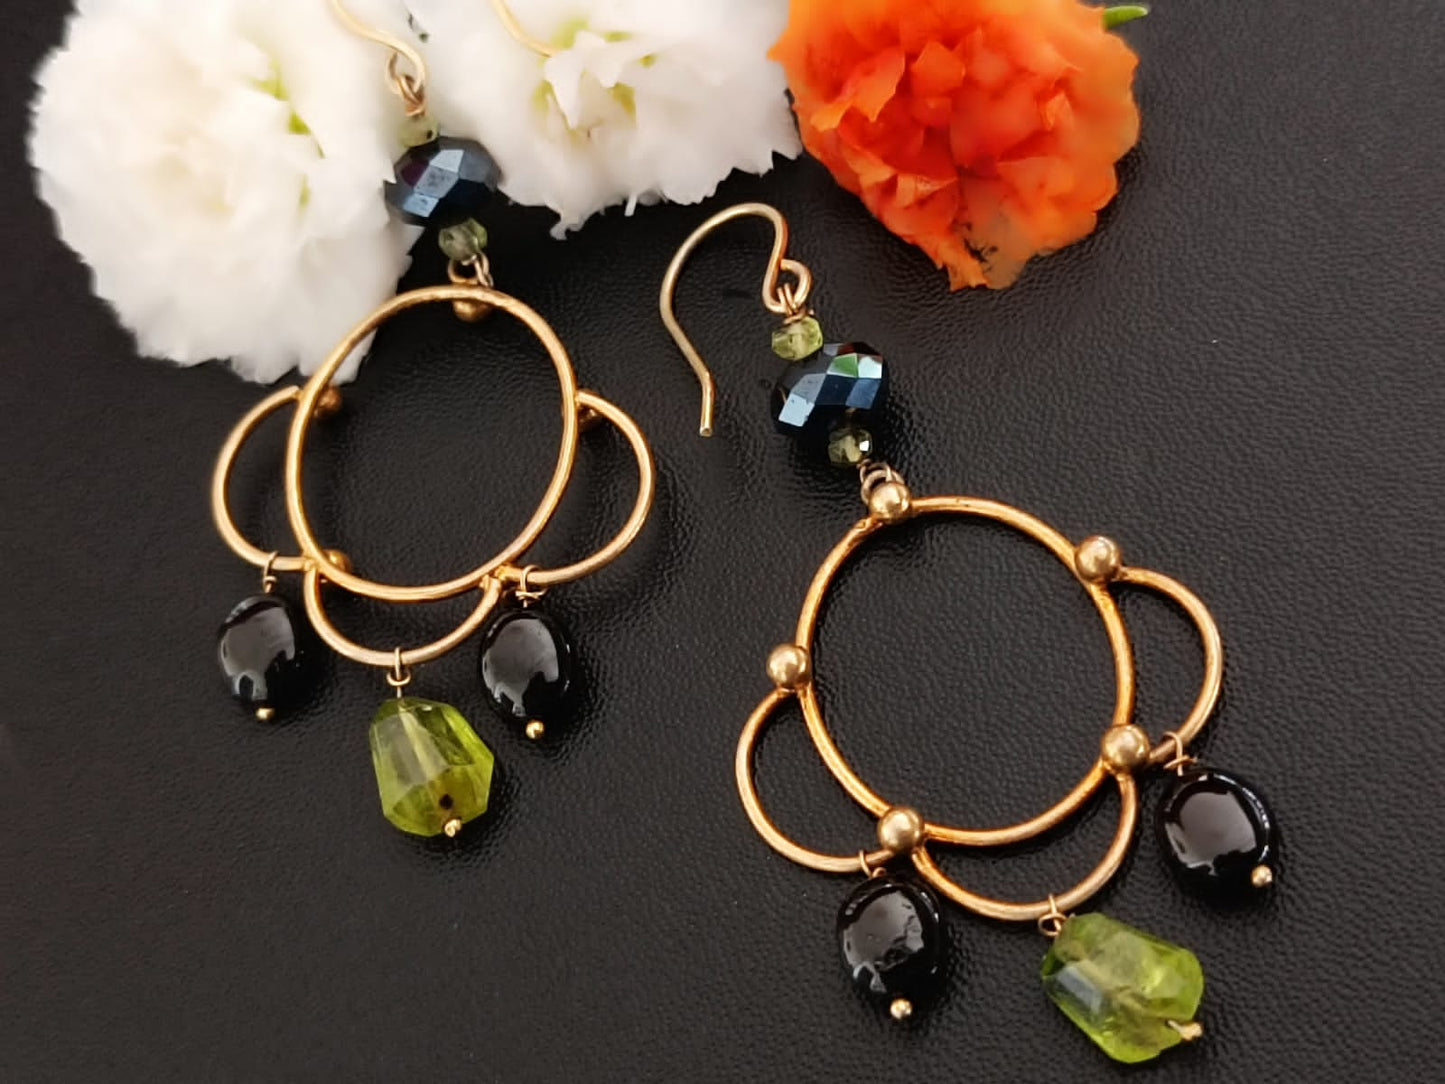 Drop earrings- Peridot, Black Onyx, Sterling silver with 1 Micron gold Plating. 